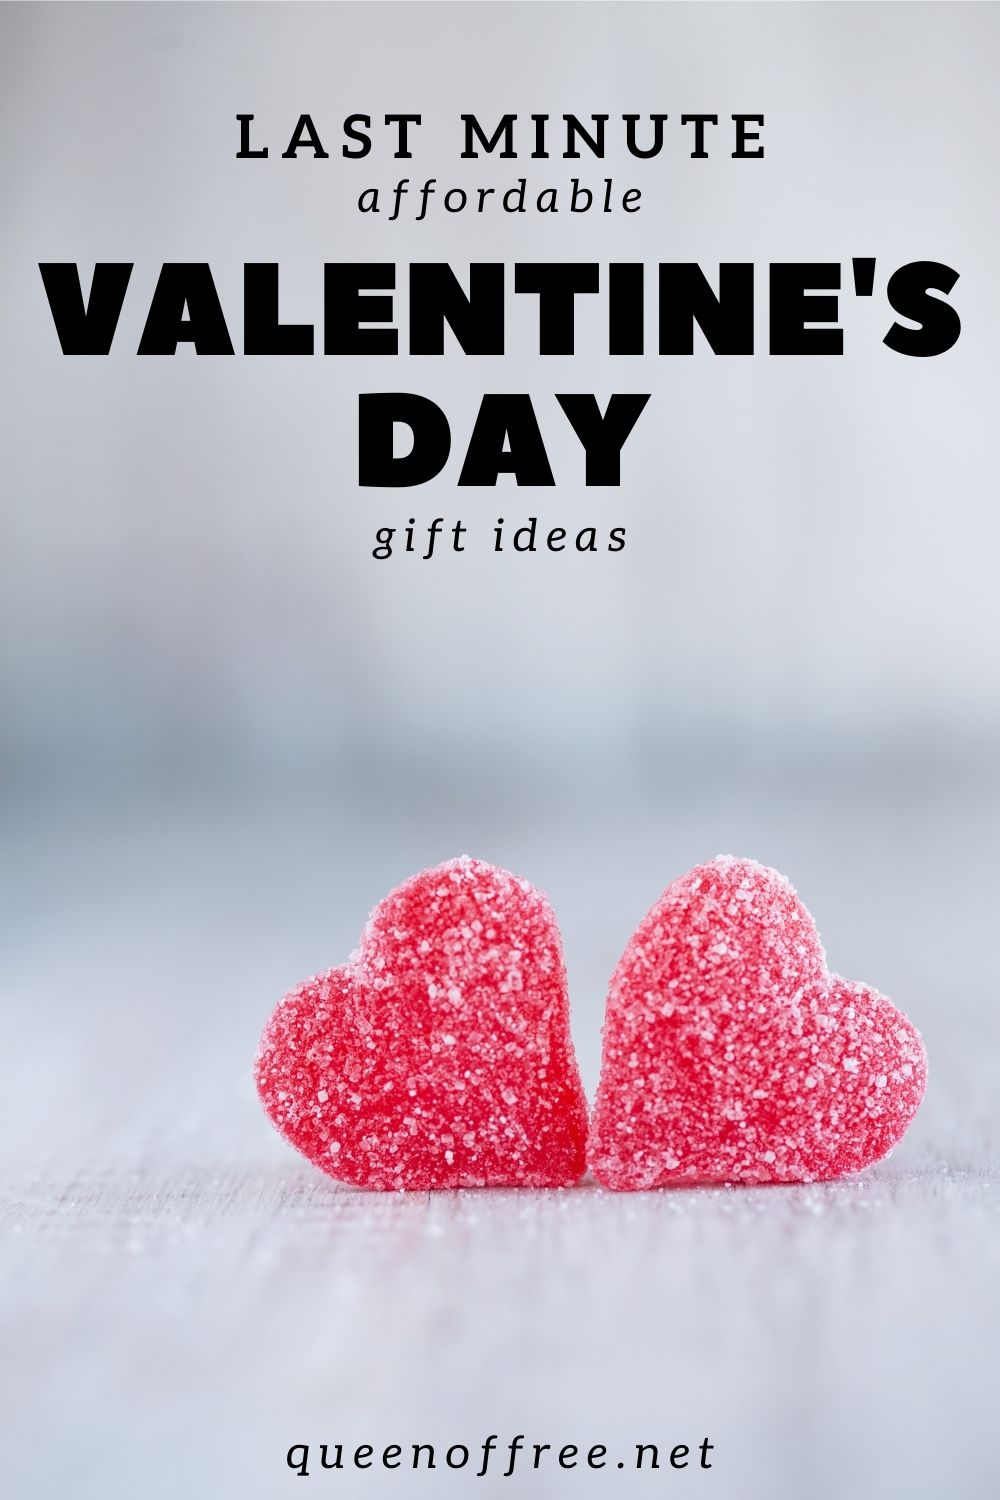 Restaurant carry out deals, unique free ideas, and more! Show your love with these last minute affordable Valentine's Day Gift ideas.